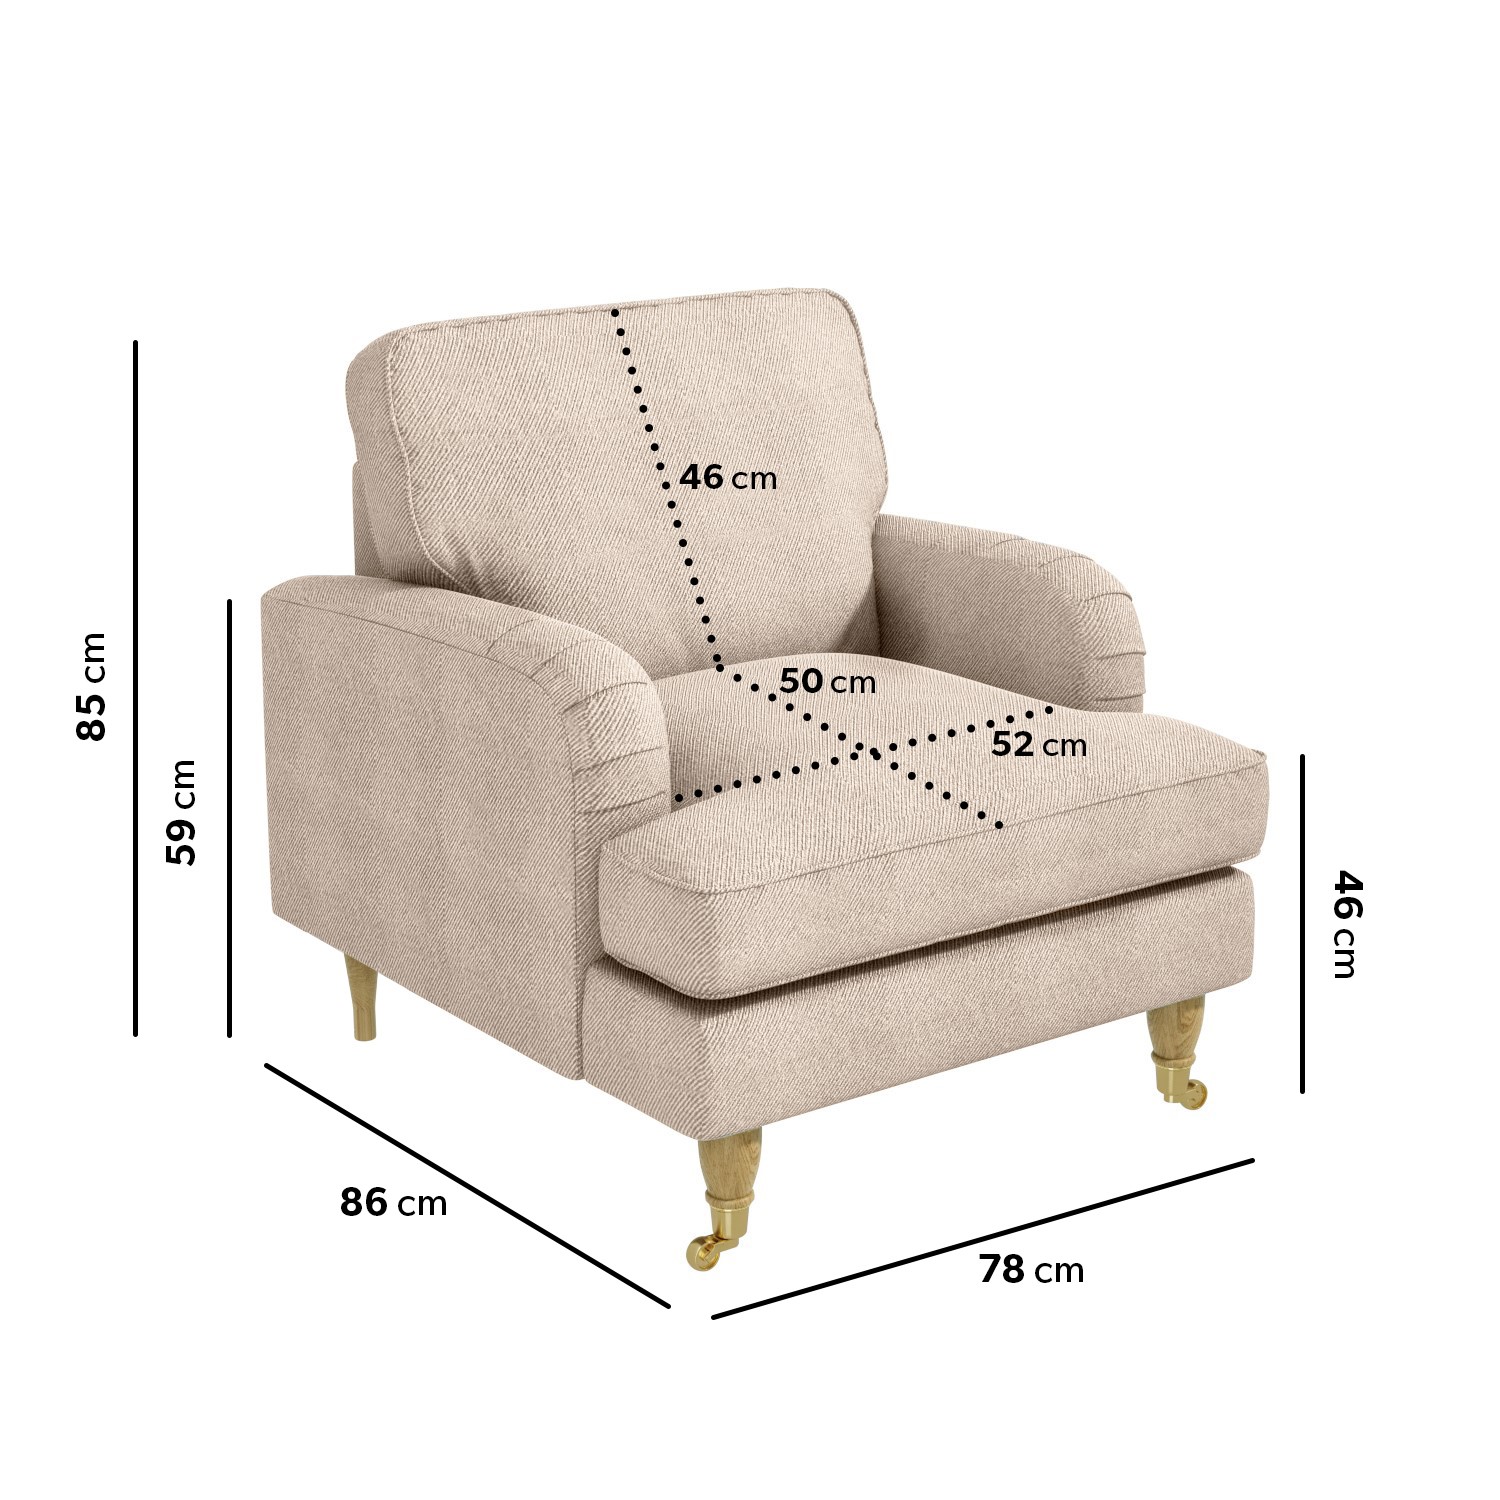 Read more about Beige woven armchair payton